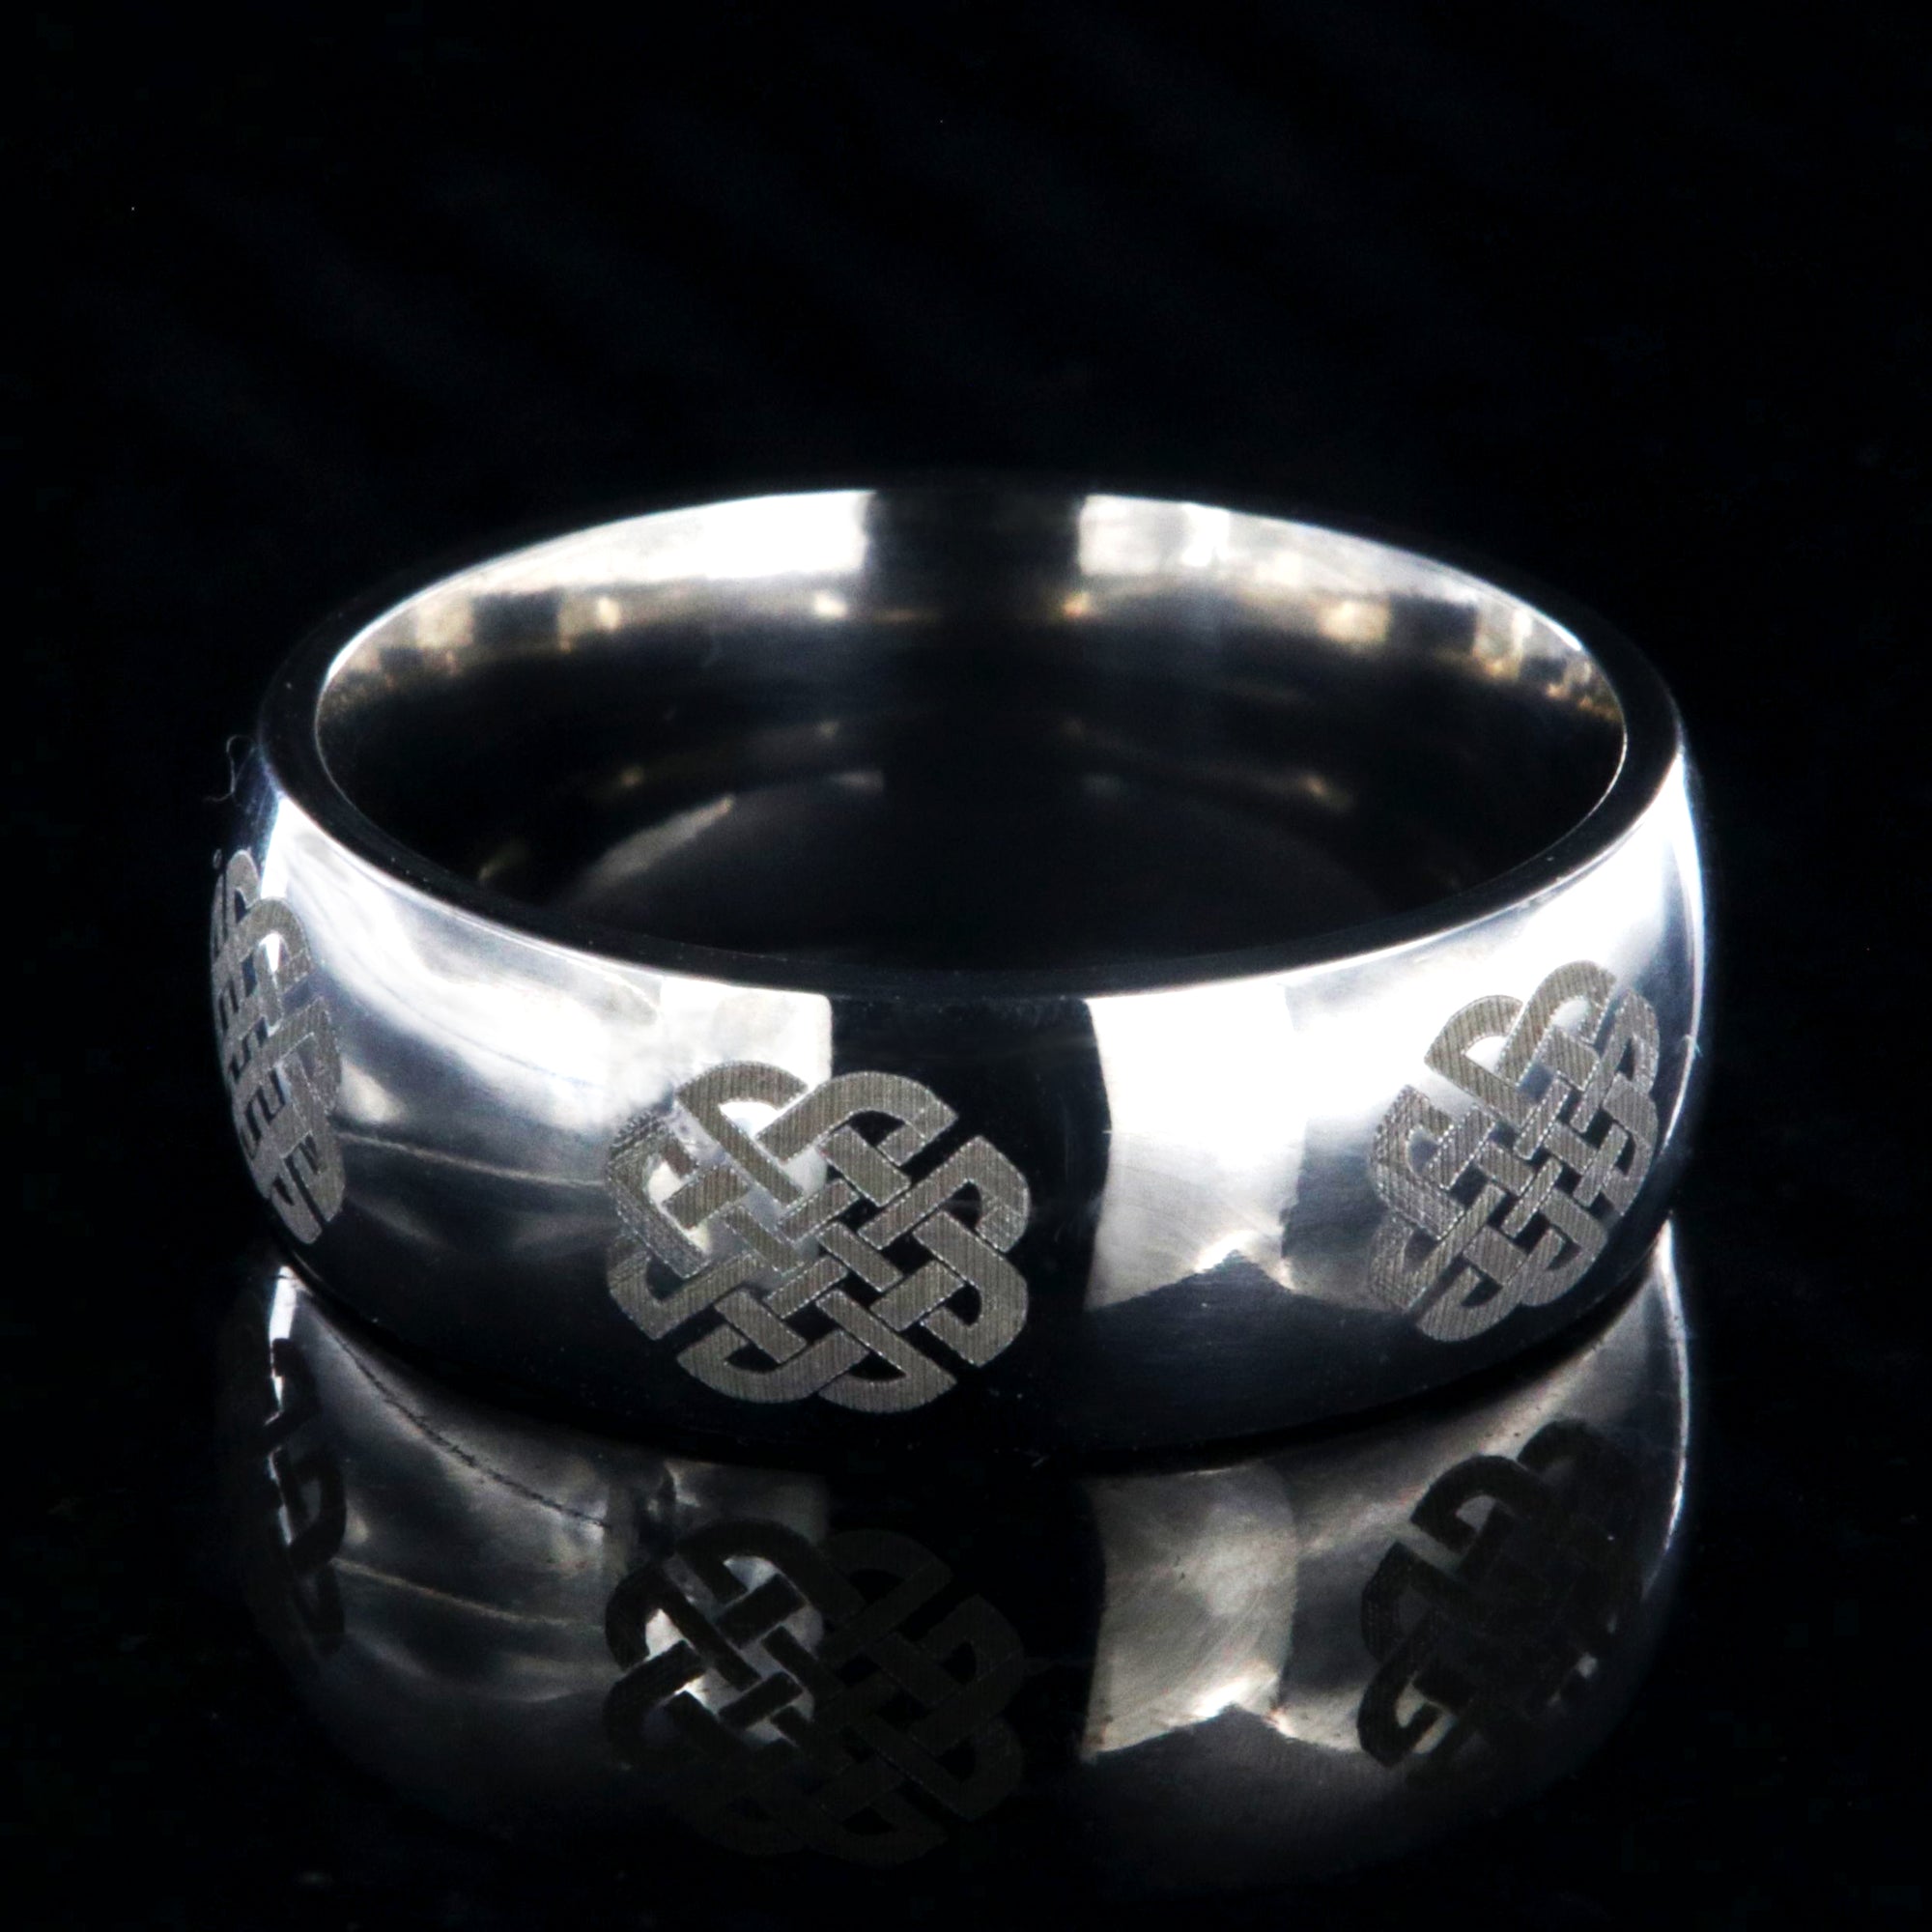 8mm wide titanium ring with Celtic knot design